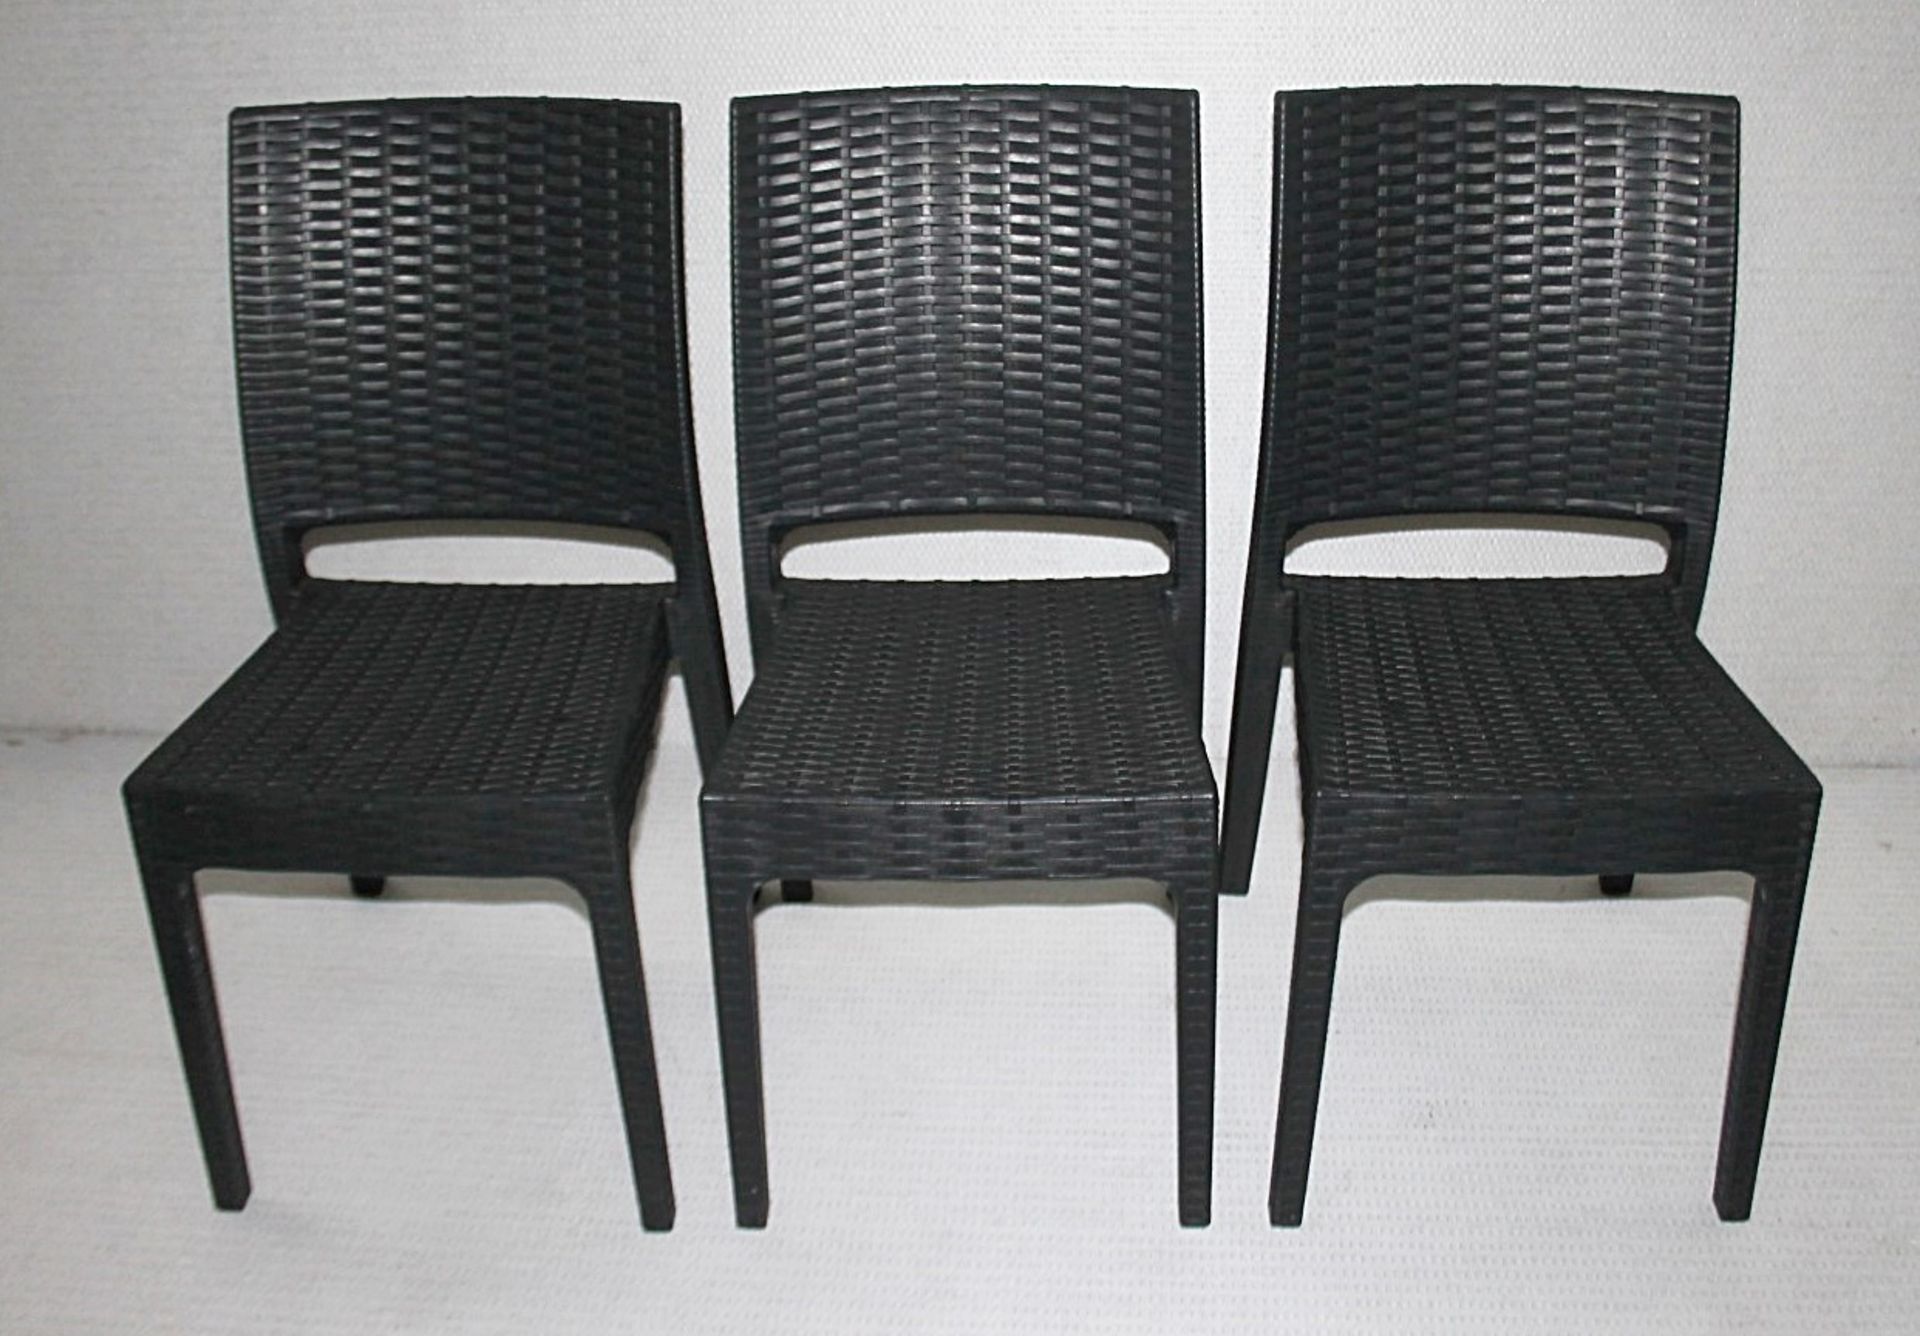 8 x SIESTA EXCLUSIVE 'Florida' Commercial Stackable Rattan-style Chairs In Dark Grey - Image 9 of 13